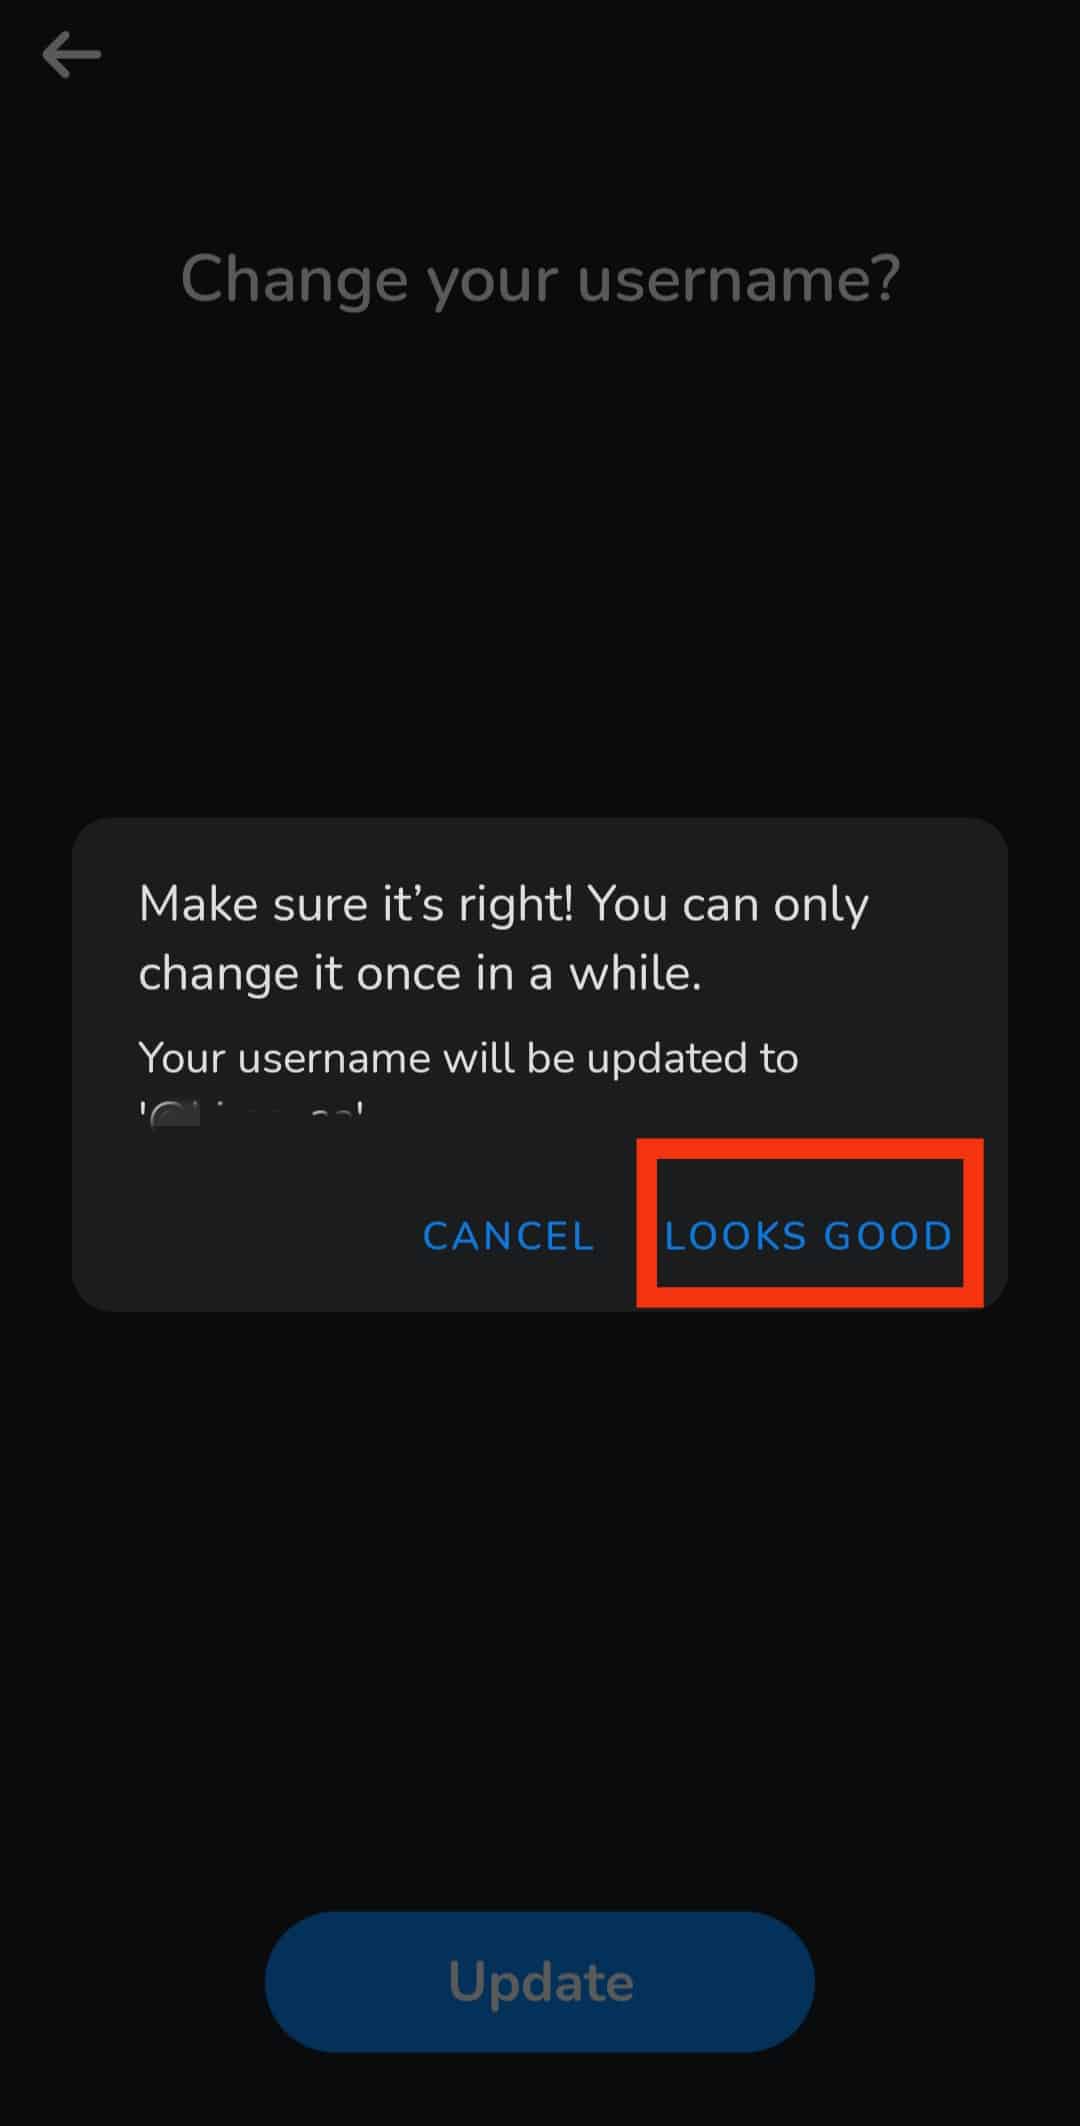 Ttap the Looks good button to save your new username after the confirmation box has appeared.